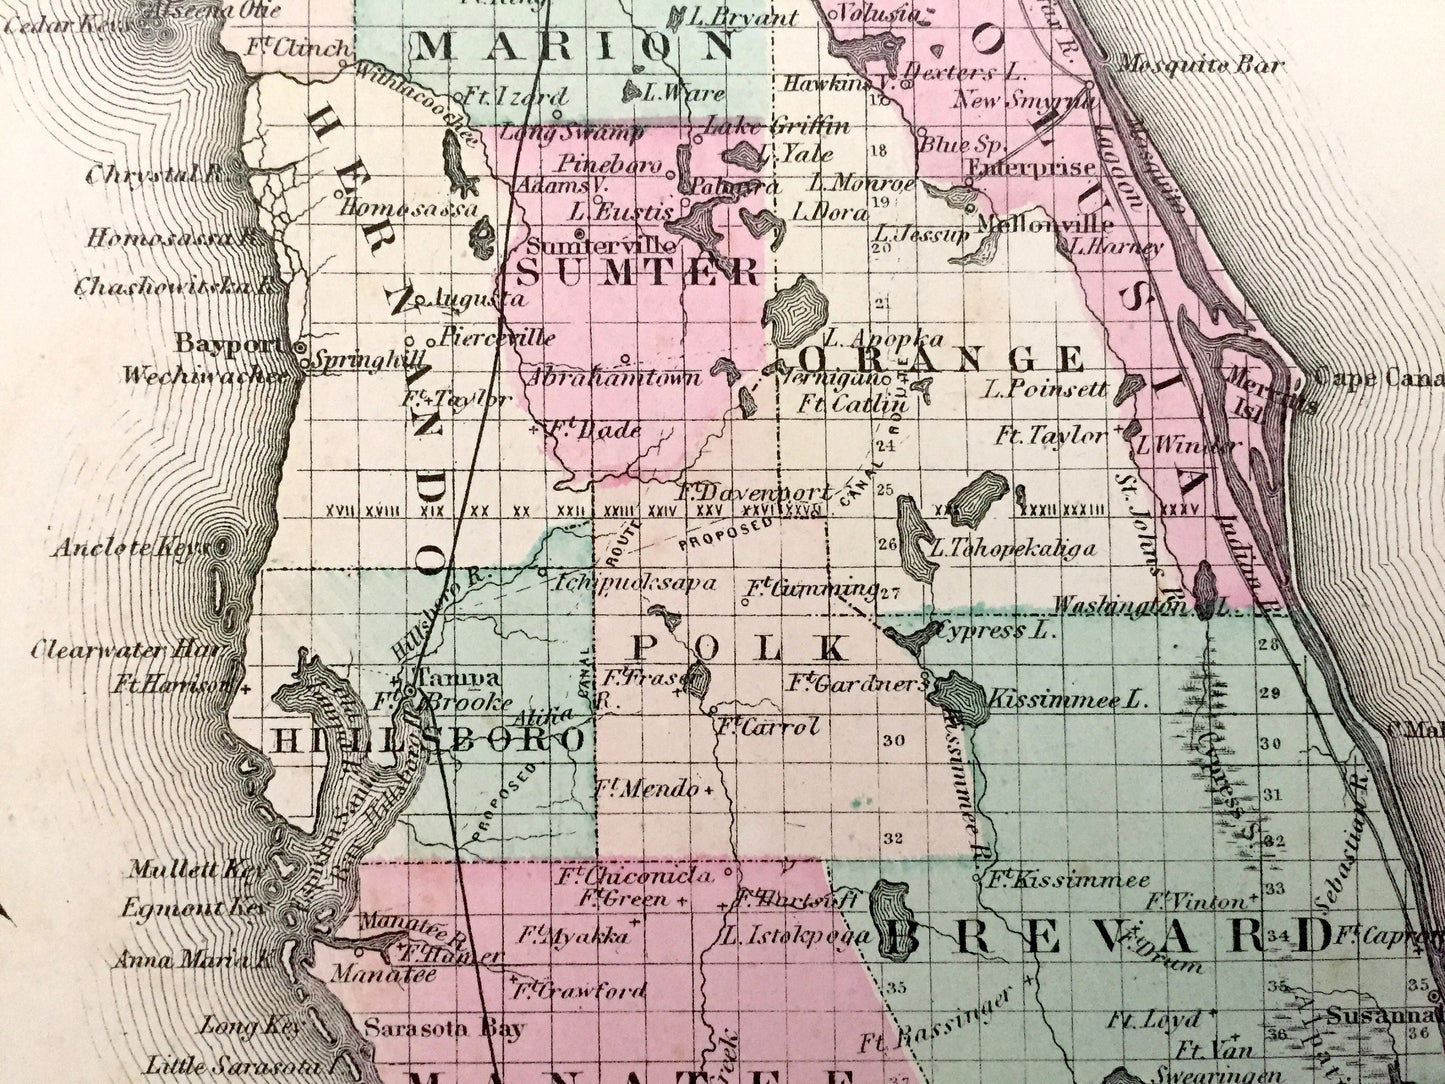 Antique 1874 Florida / Alabama State Map from O.W. Gray's Atlas of United States of America; Stedman, Brown & Lyon – Key West, Miami Beach